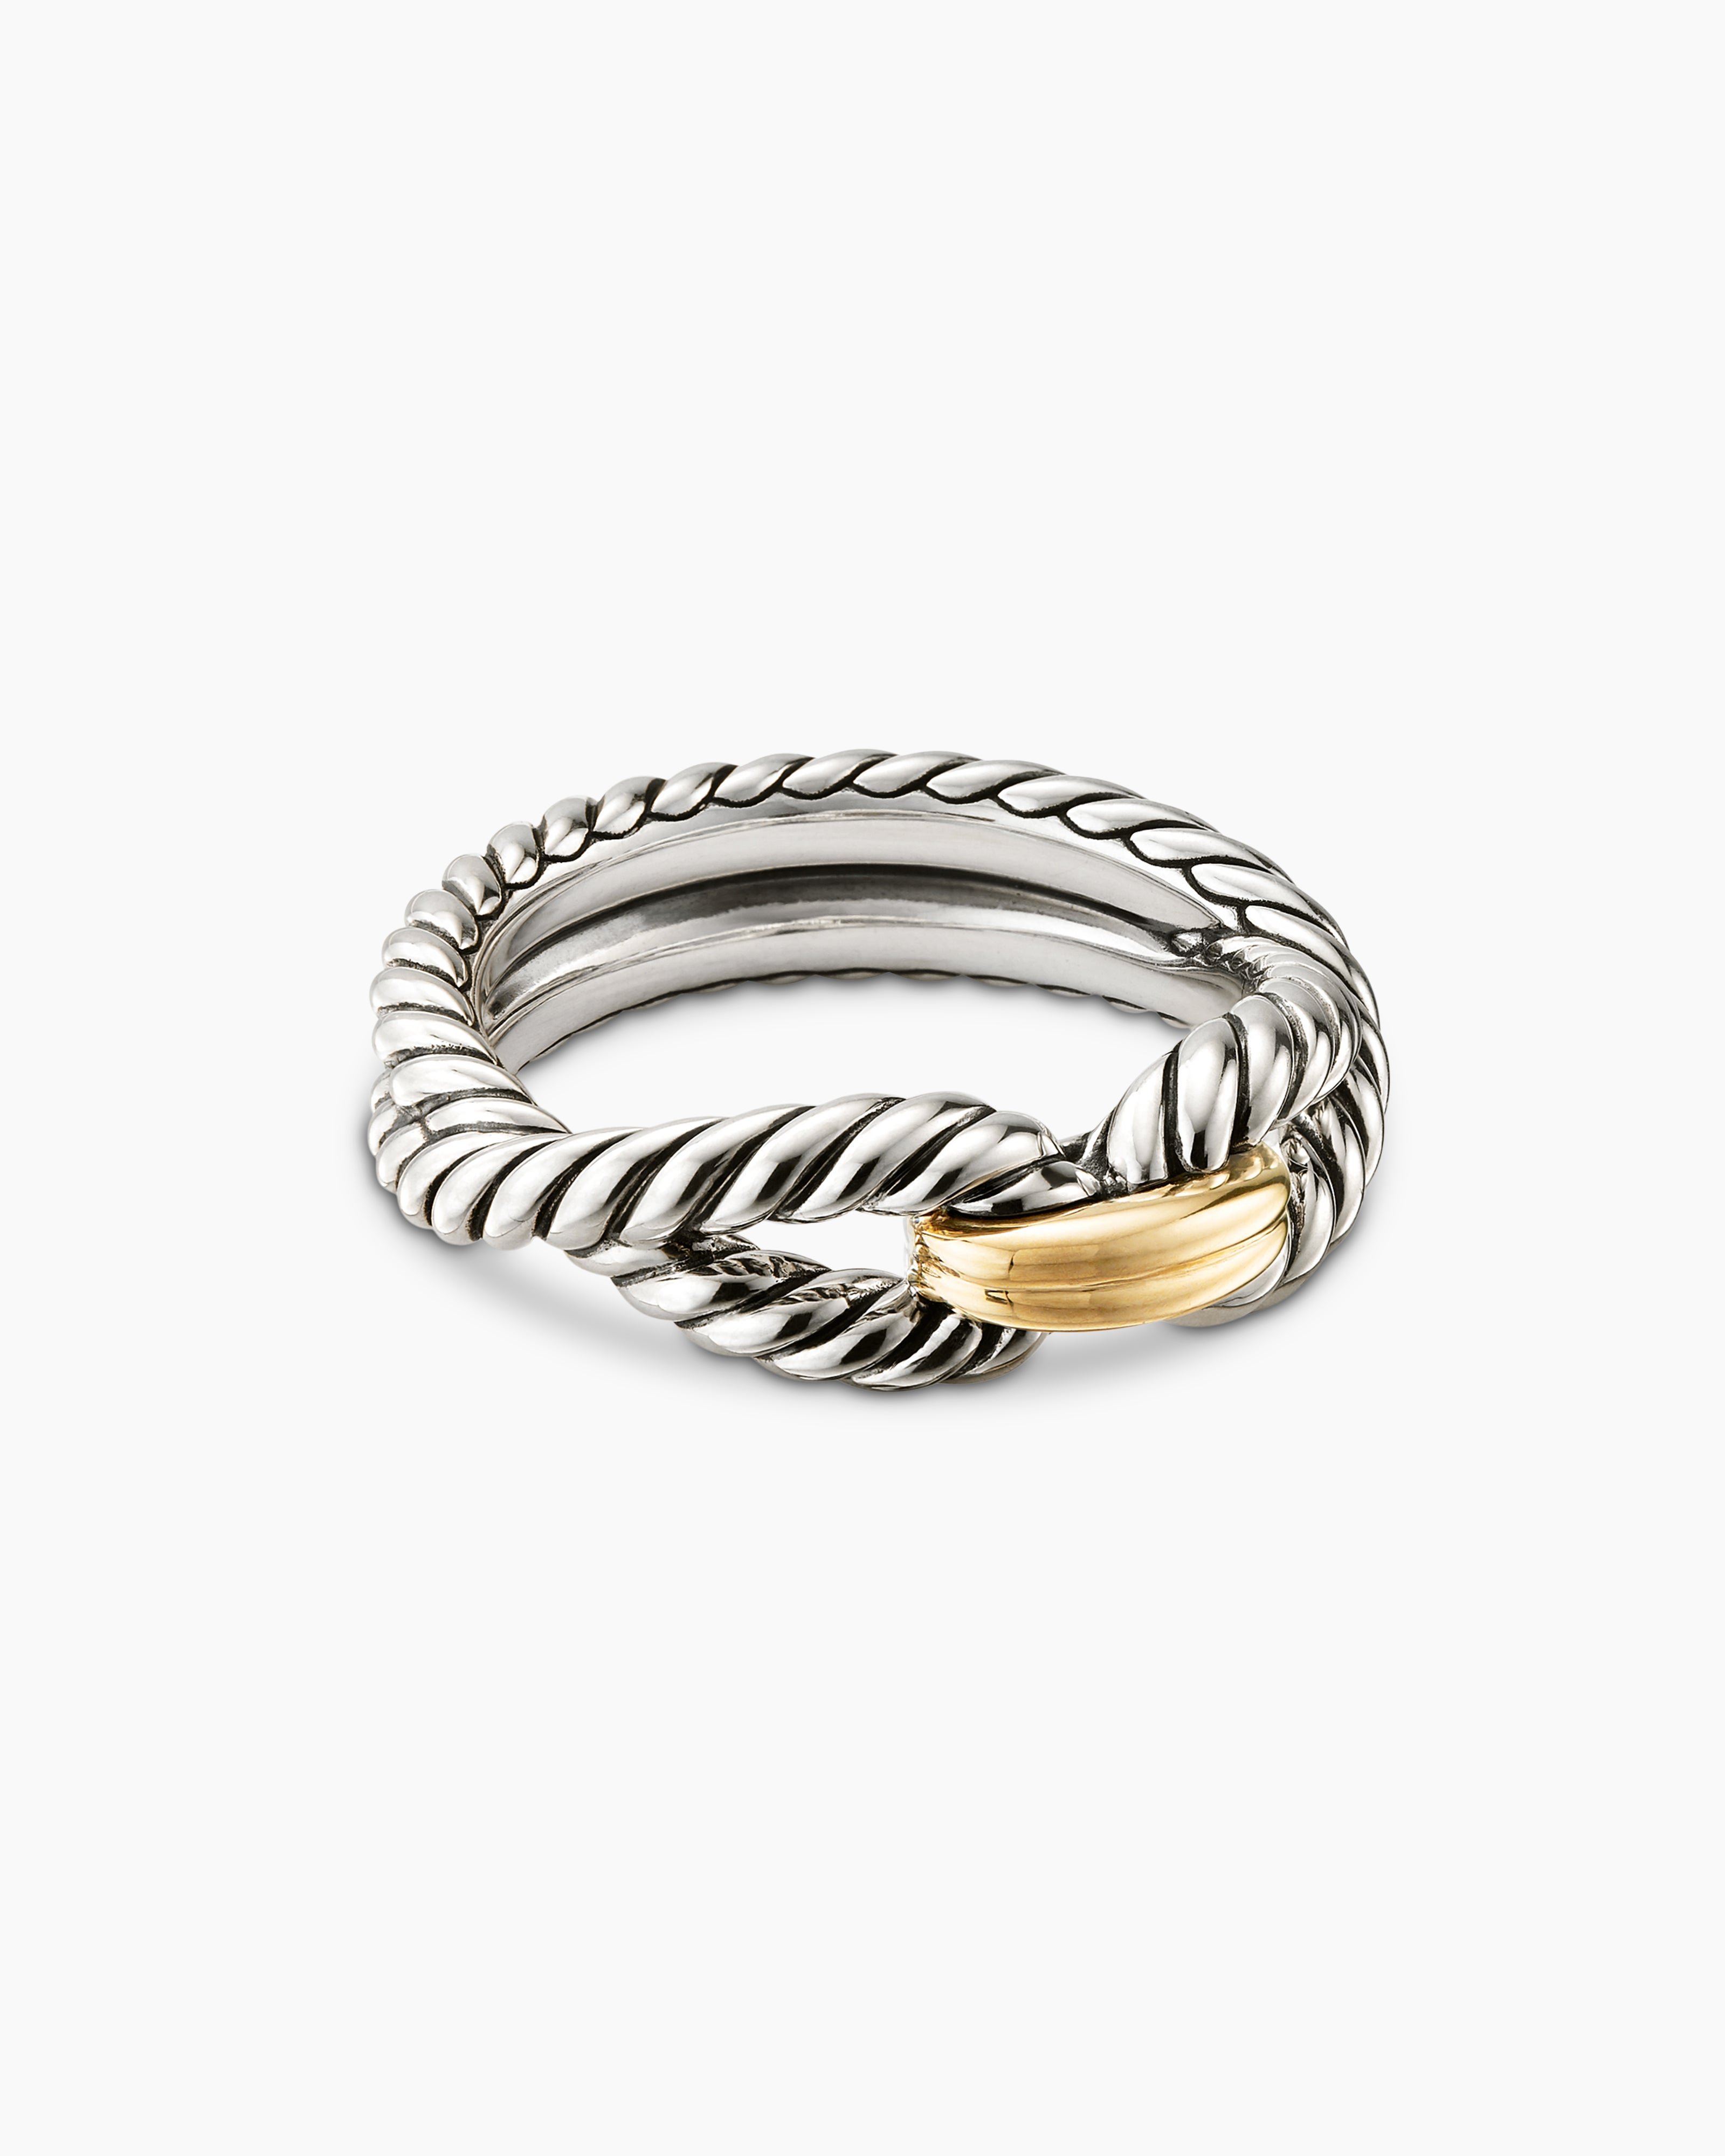 DY Cable Band Ring in 18K Yellow Gold, 2.45mm | David Yurman